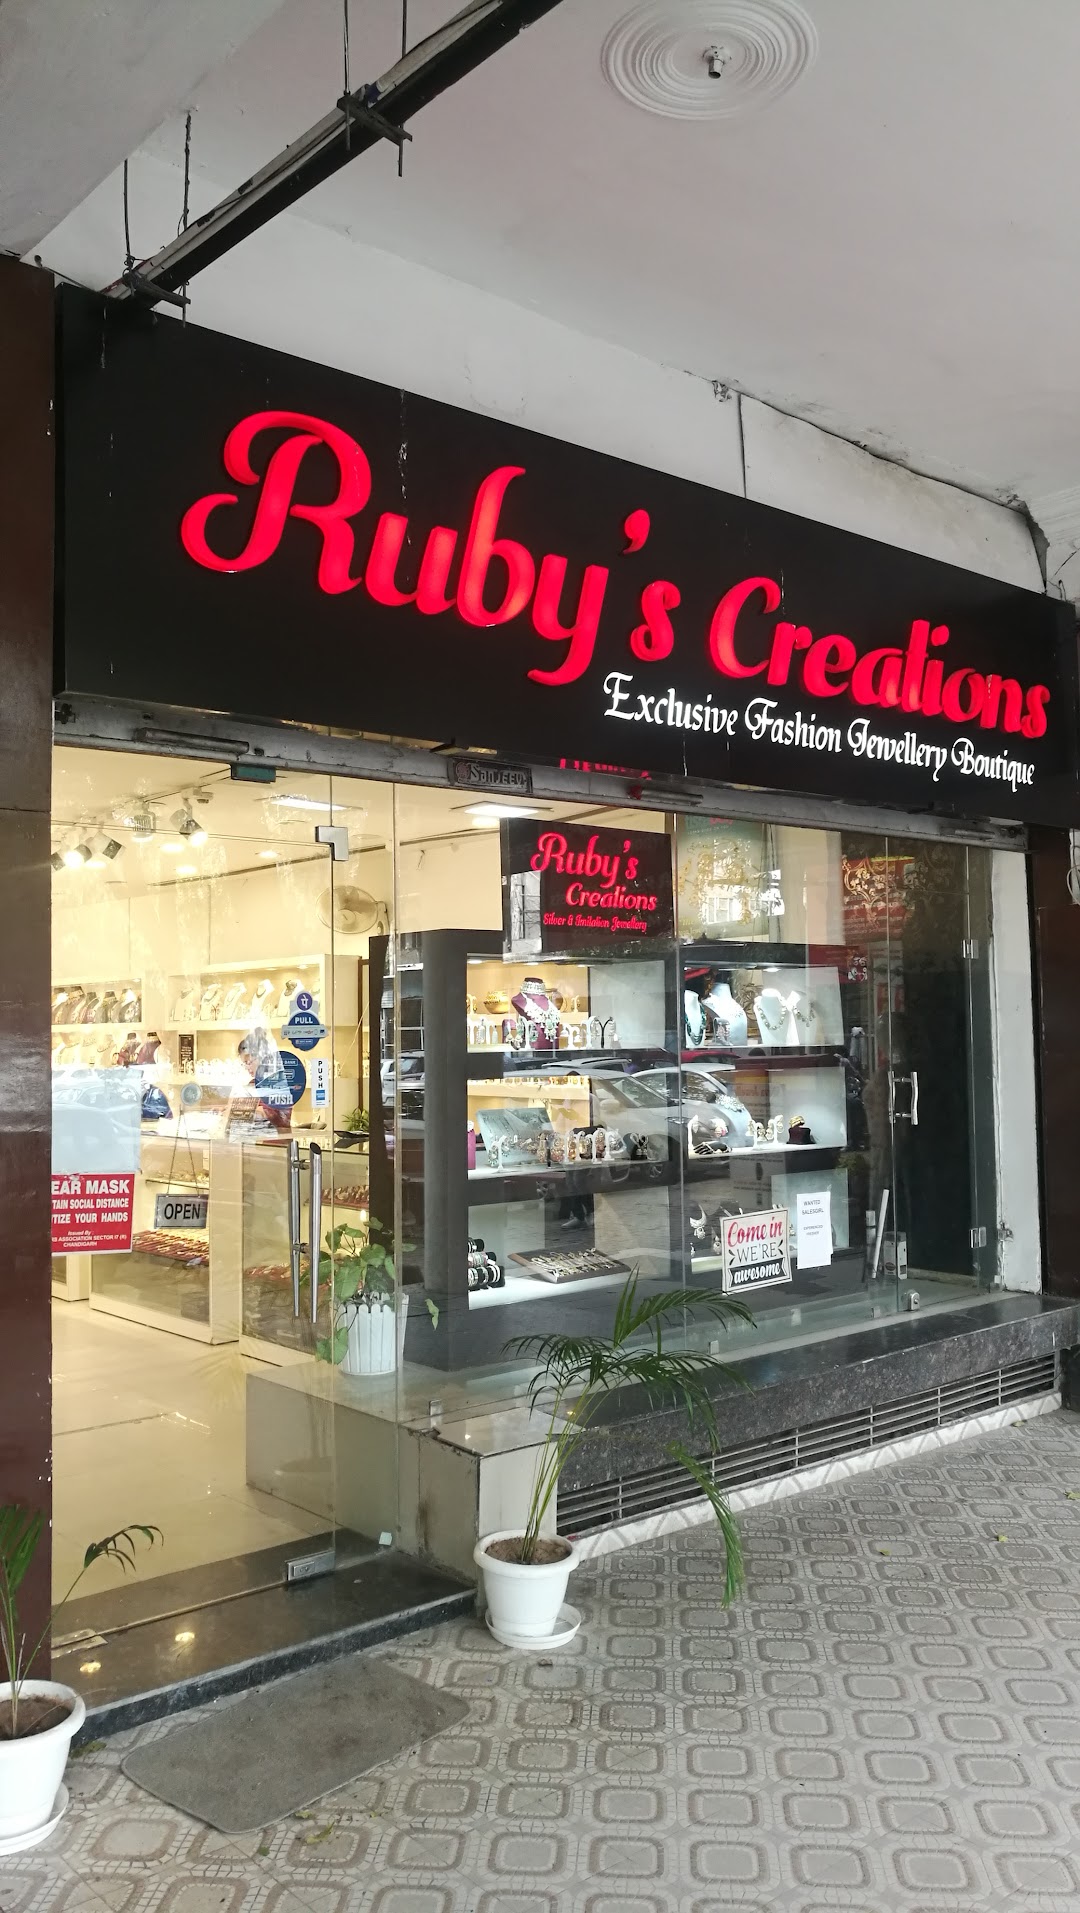 Rubys creations